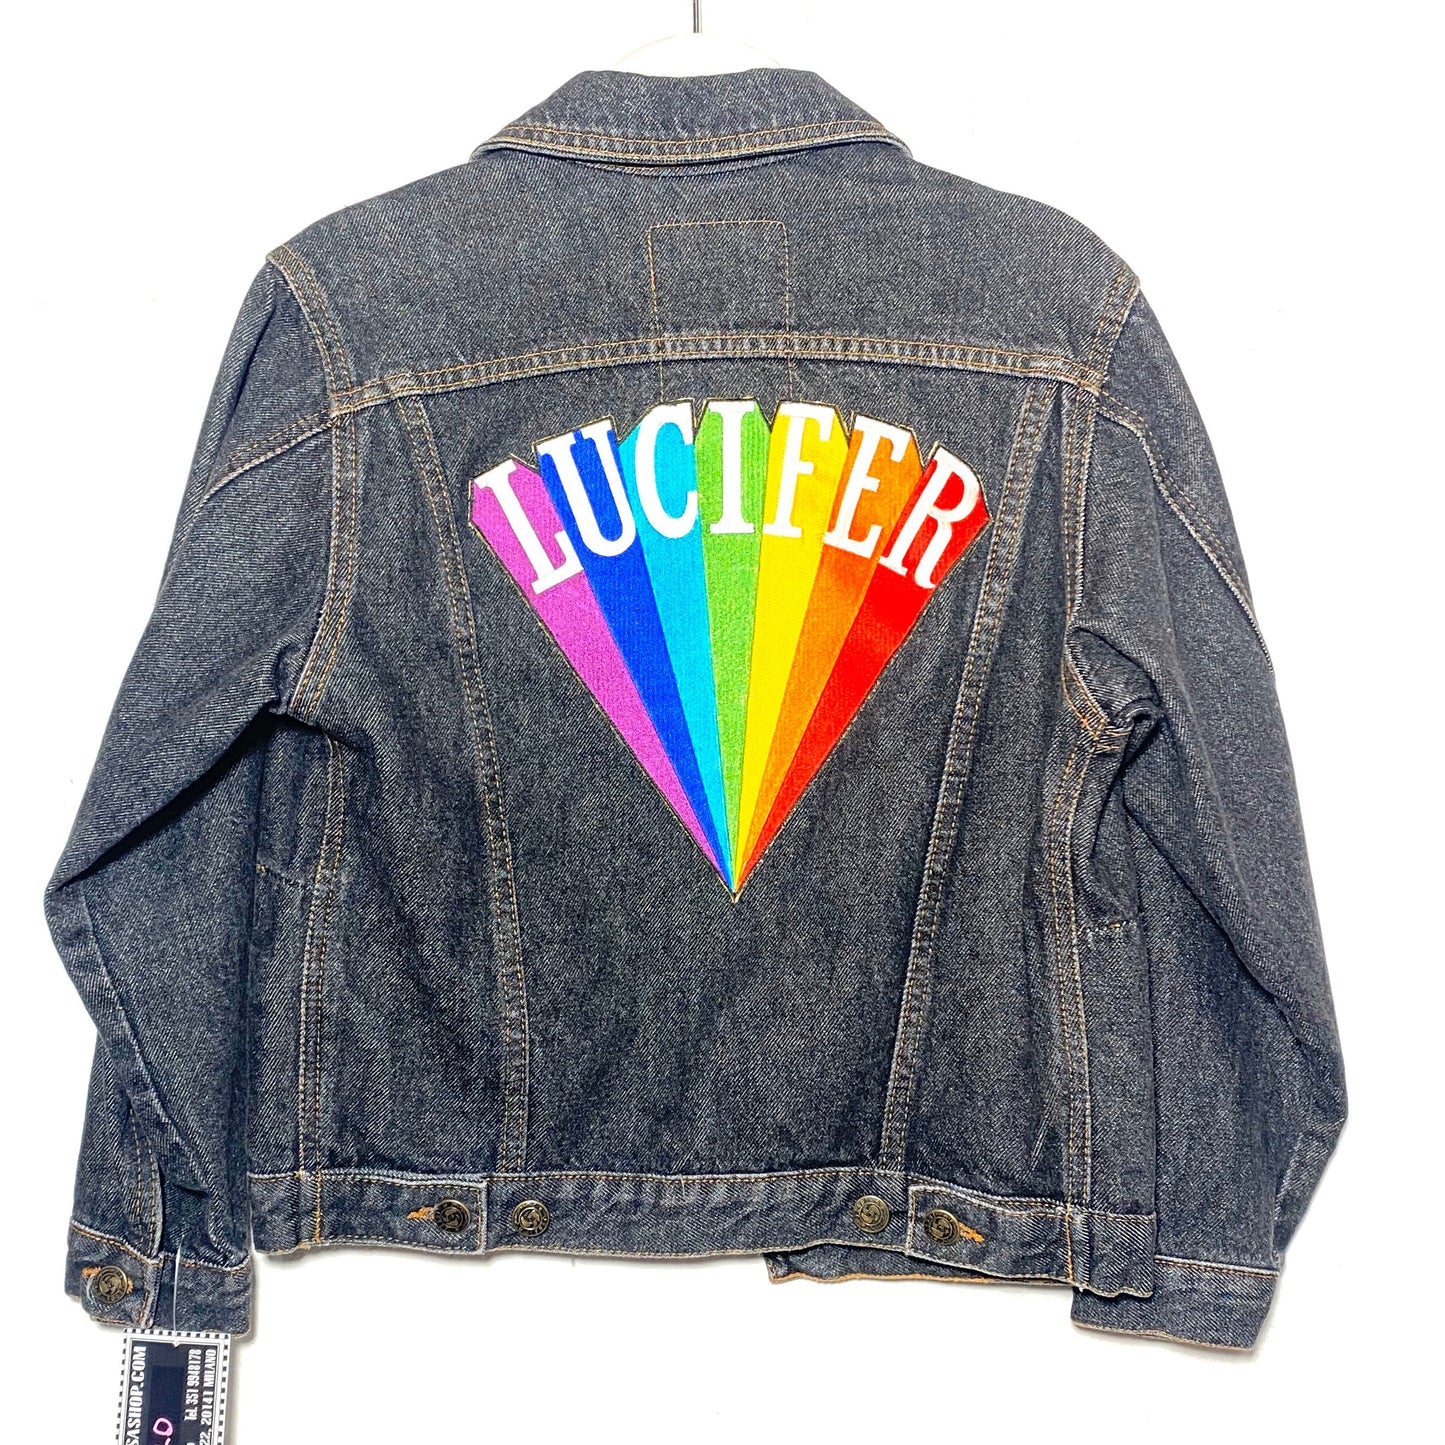 Lucifer anger patched ladies grey denim trucker jacked by Jessi INLT, made in. italy in the 80s, perfect